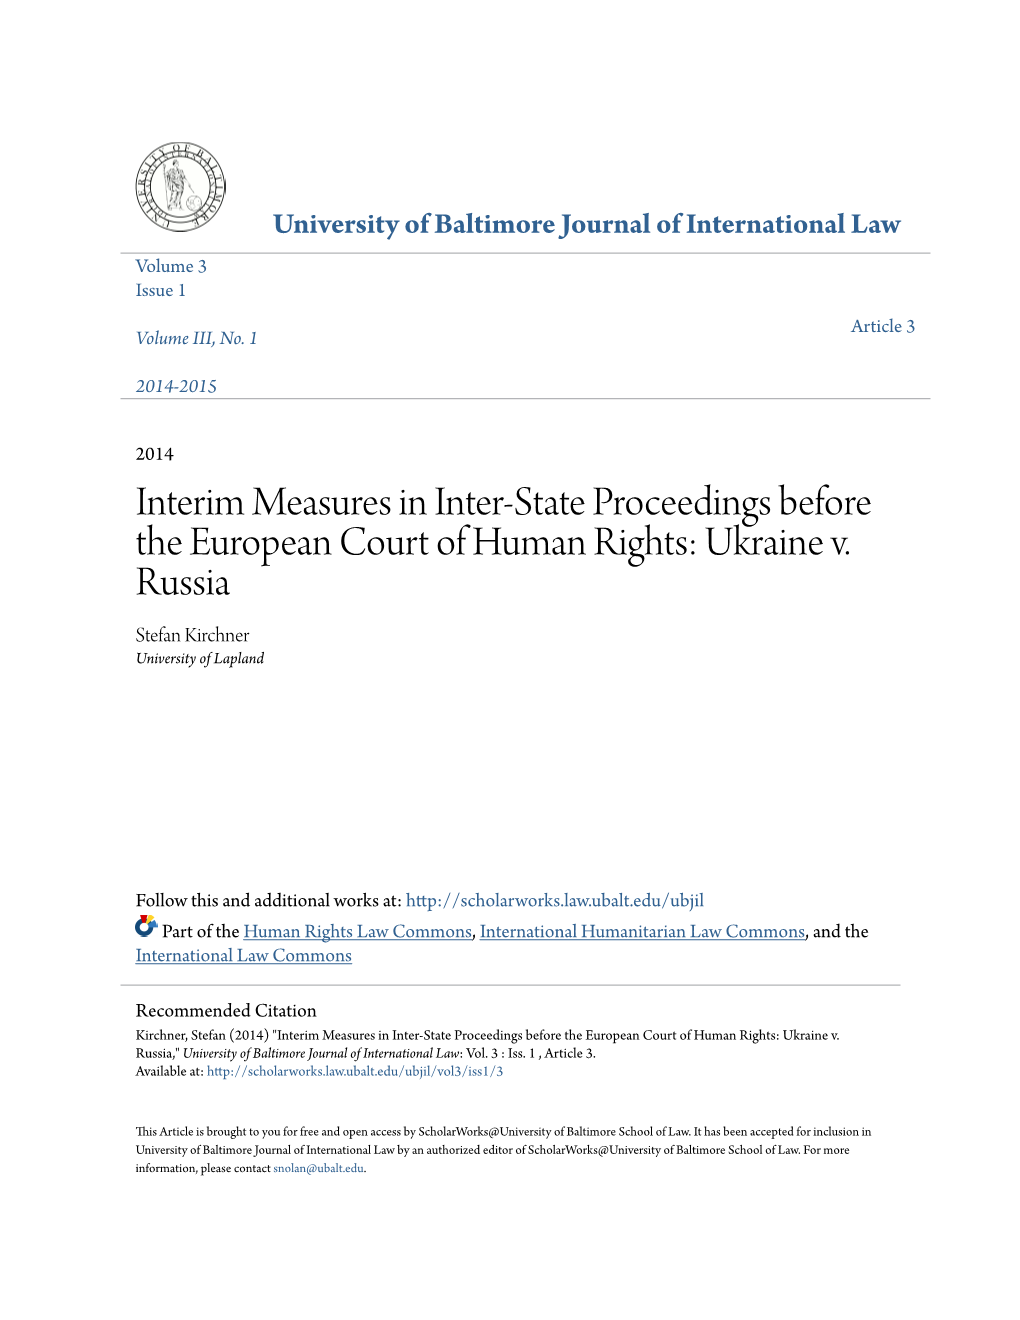 Interim Measures in Inter-State Proceedings Before the European Court of Human Rights: Ukraine V